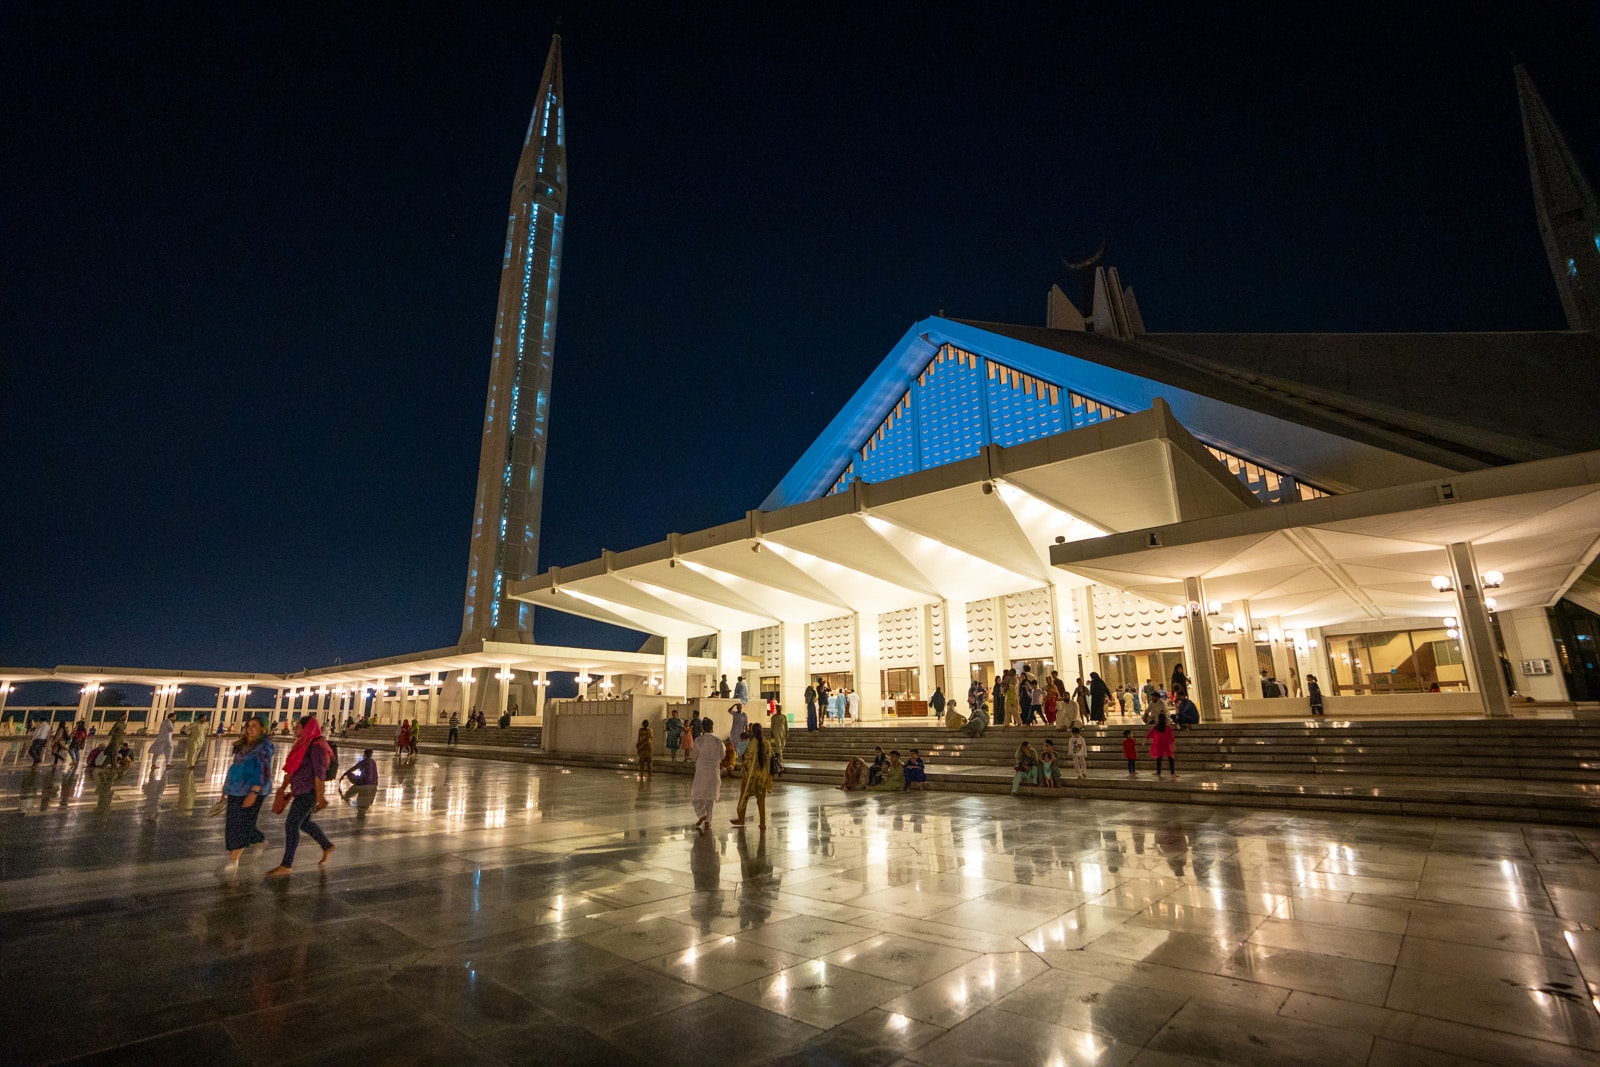 People sitting at Faisal Mosque in Islamabad, Pakistan at night